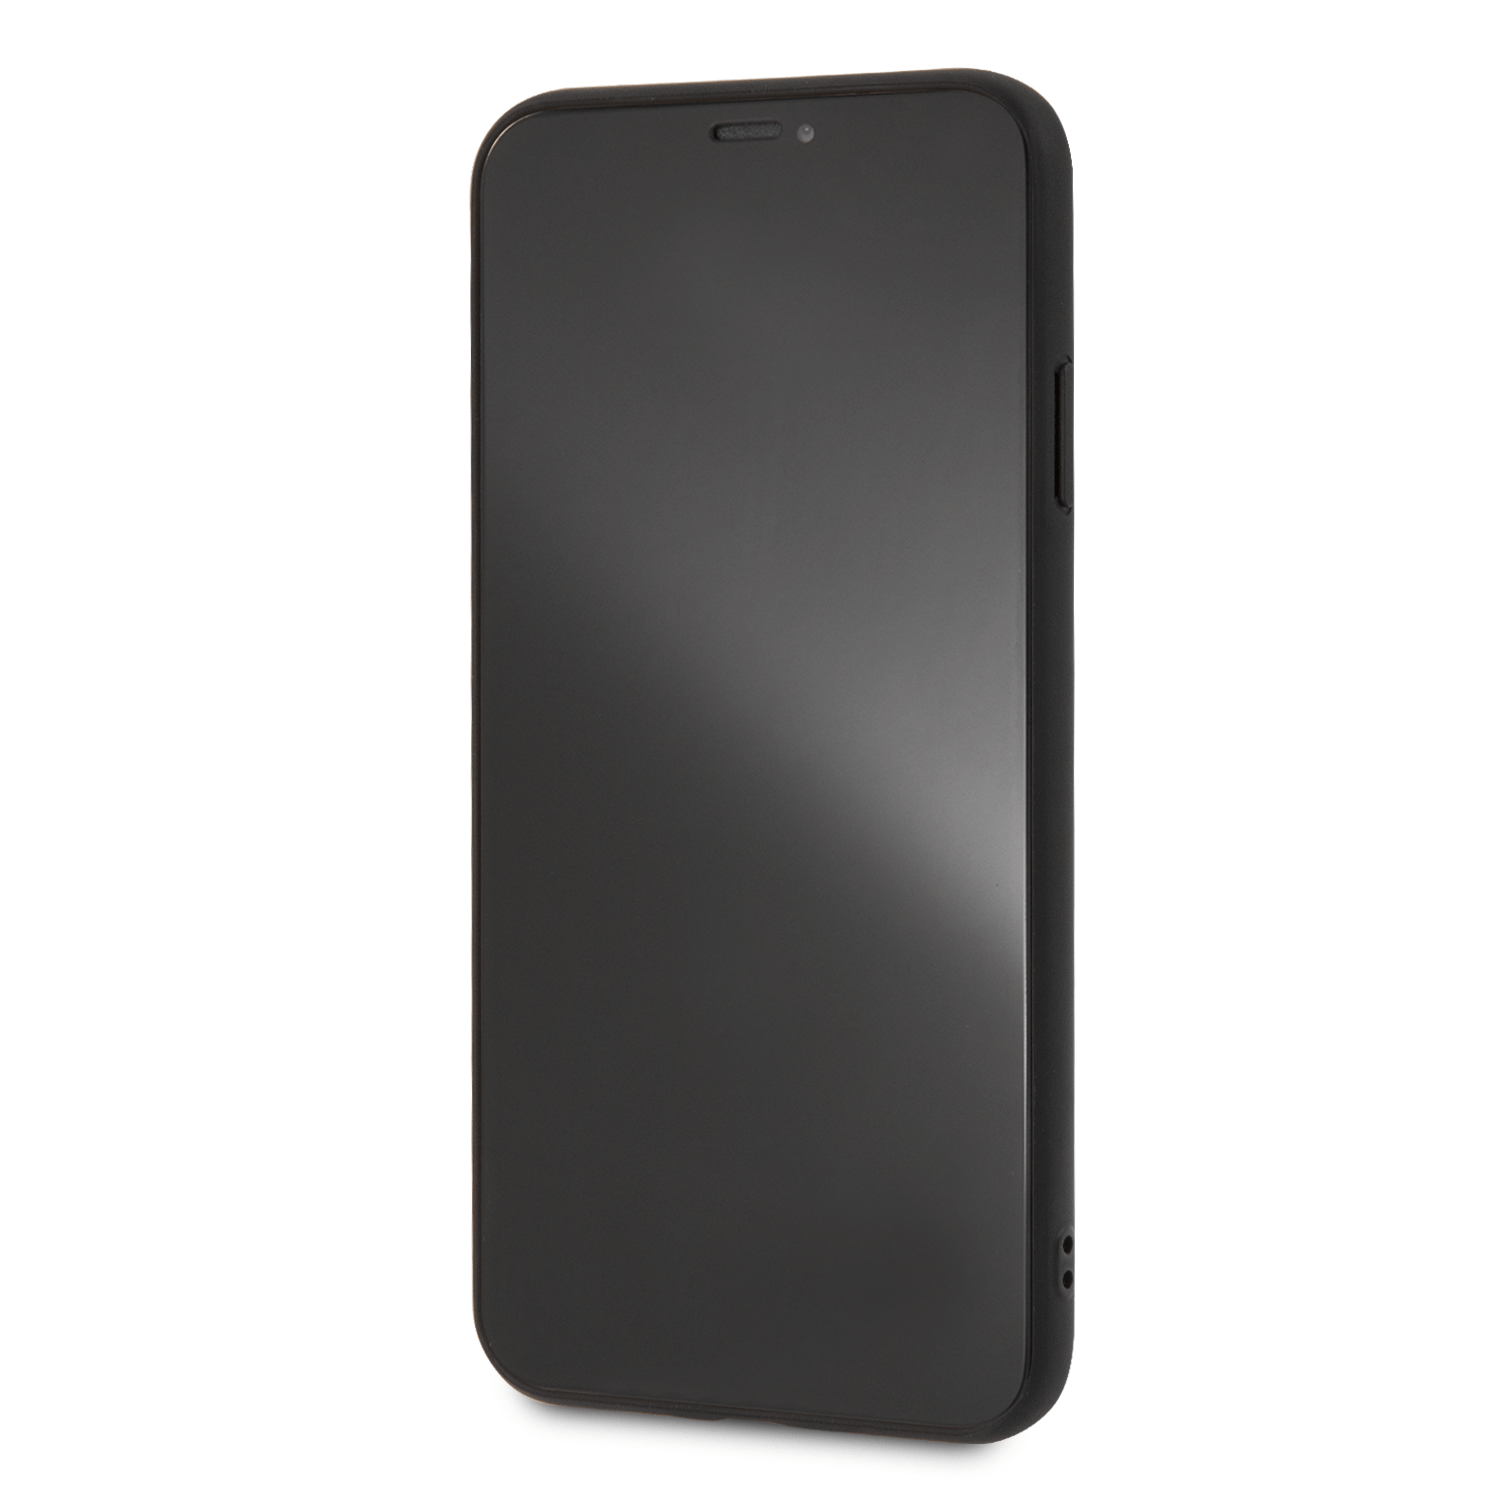 Discover the Ferrari case for iPhone XS Max, featuring a slim and form-fitting design for a sleek and secure fit